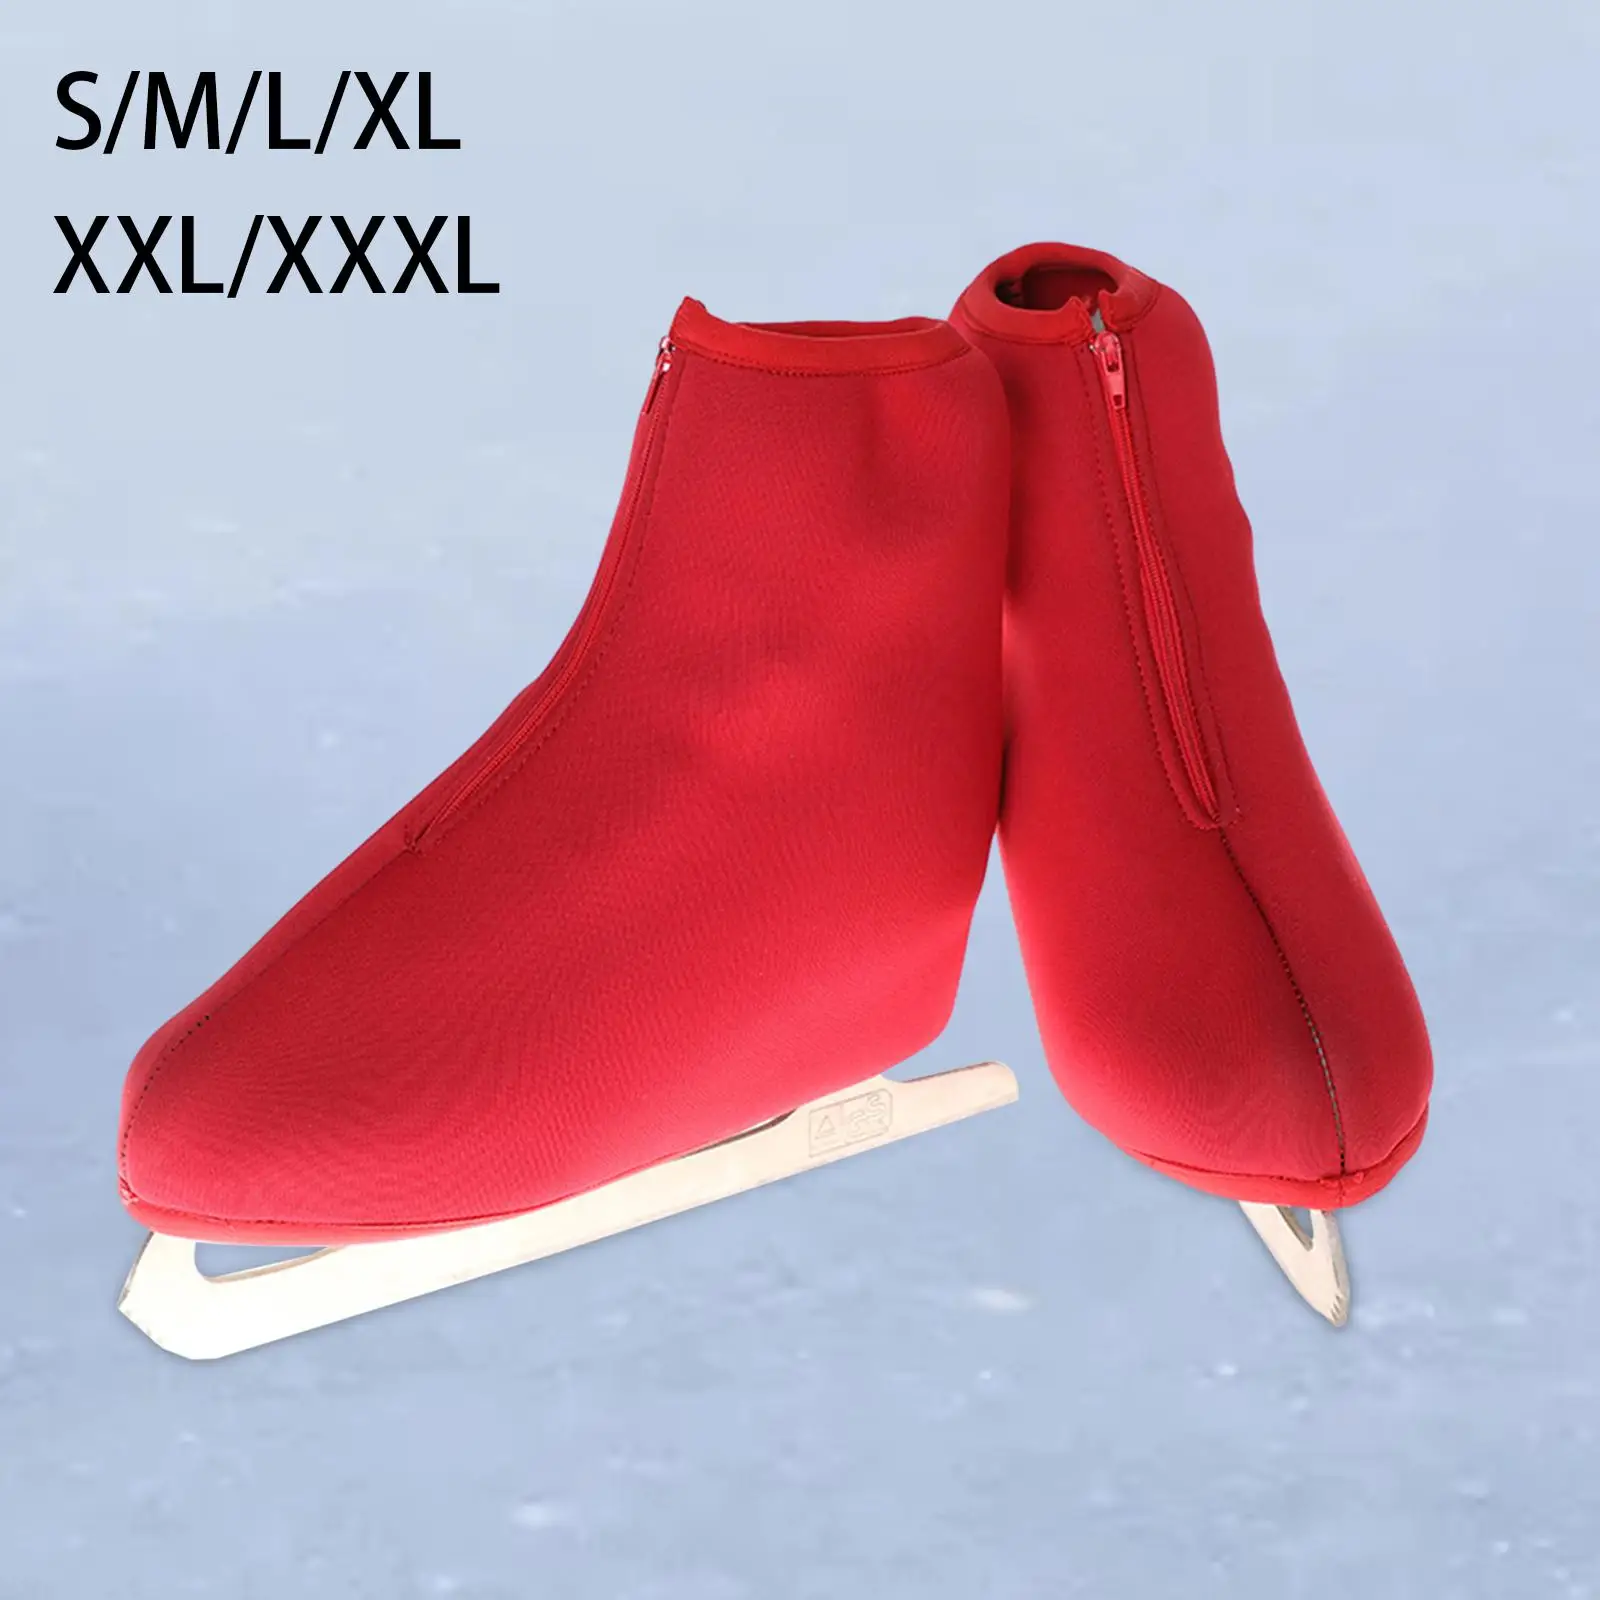 1 Pair Ice Skate Boot Covers Accessories Shoes Protector Figure Skating Boot Covers for Figure Skates Roller Skates Ice Skating